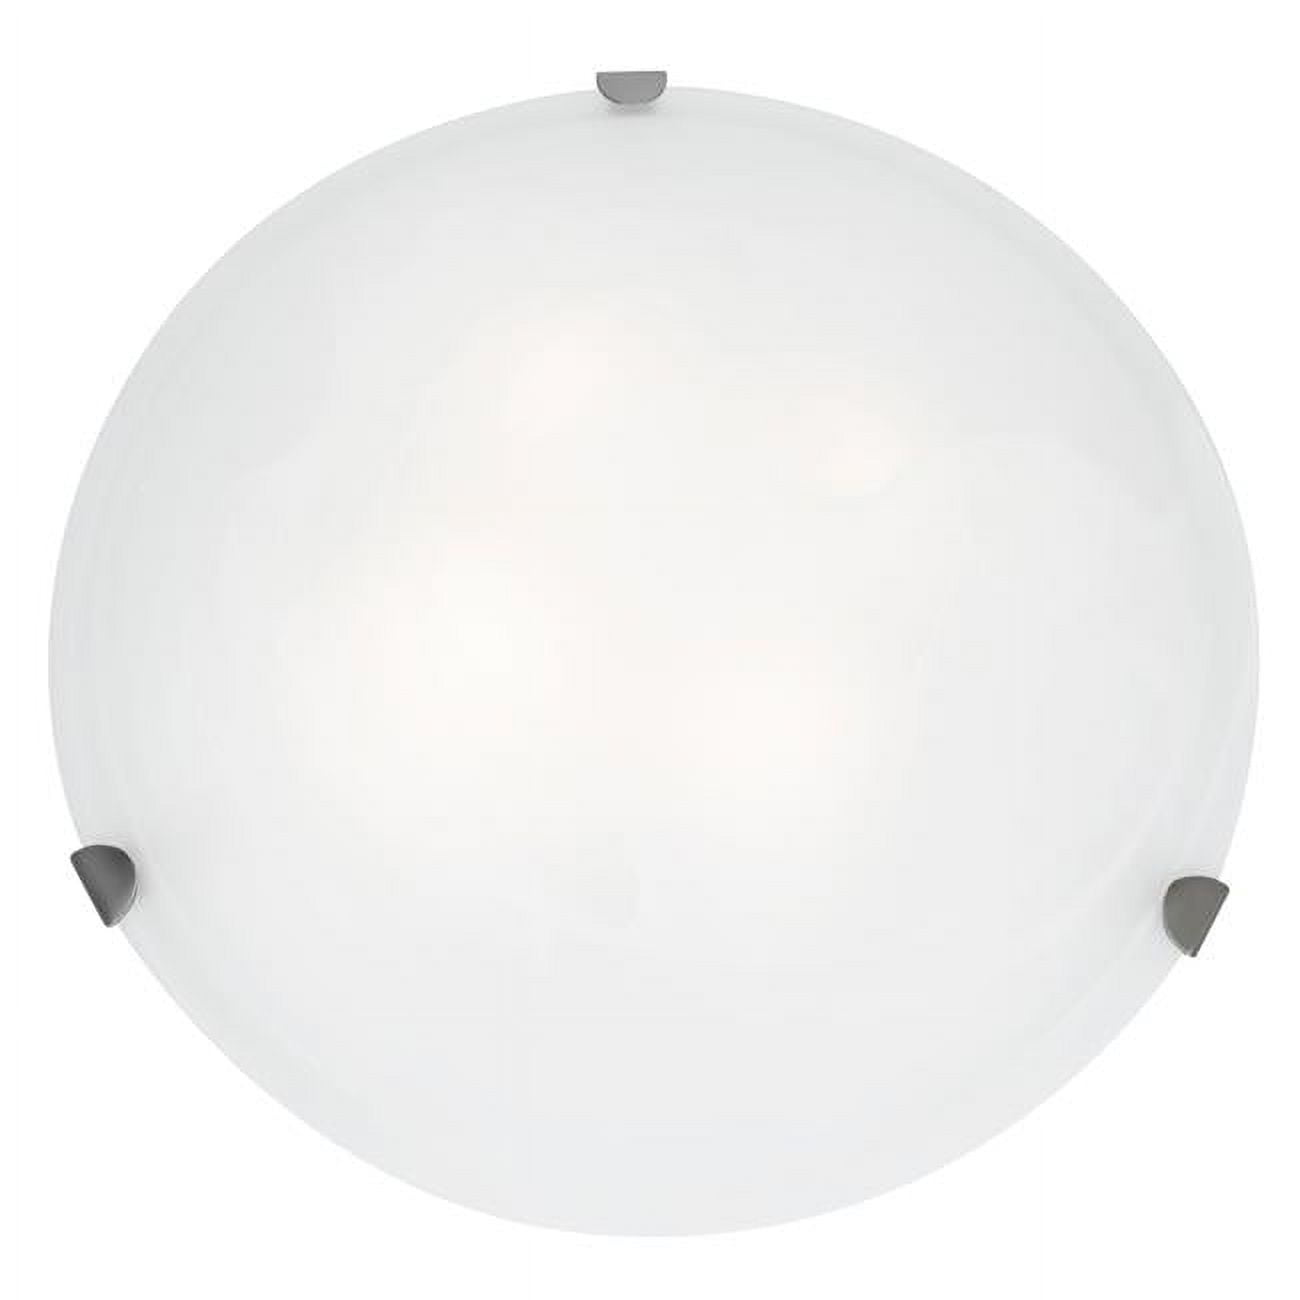 Picture of Access Lighting 50161-WH-OPL Orion 3 Light White Flush Mount Ceiling Light in Incandescent, Opal